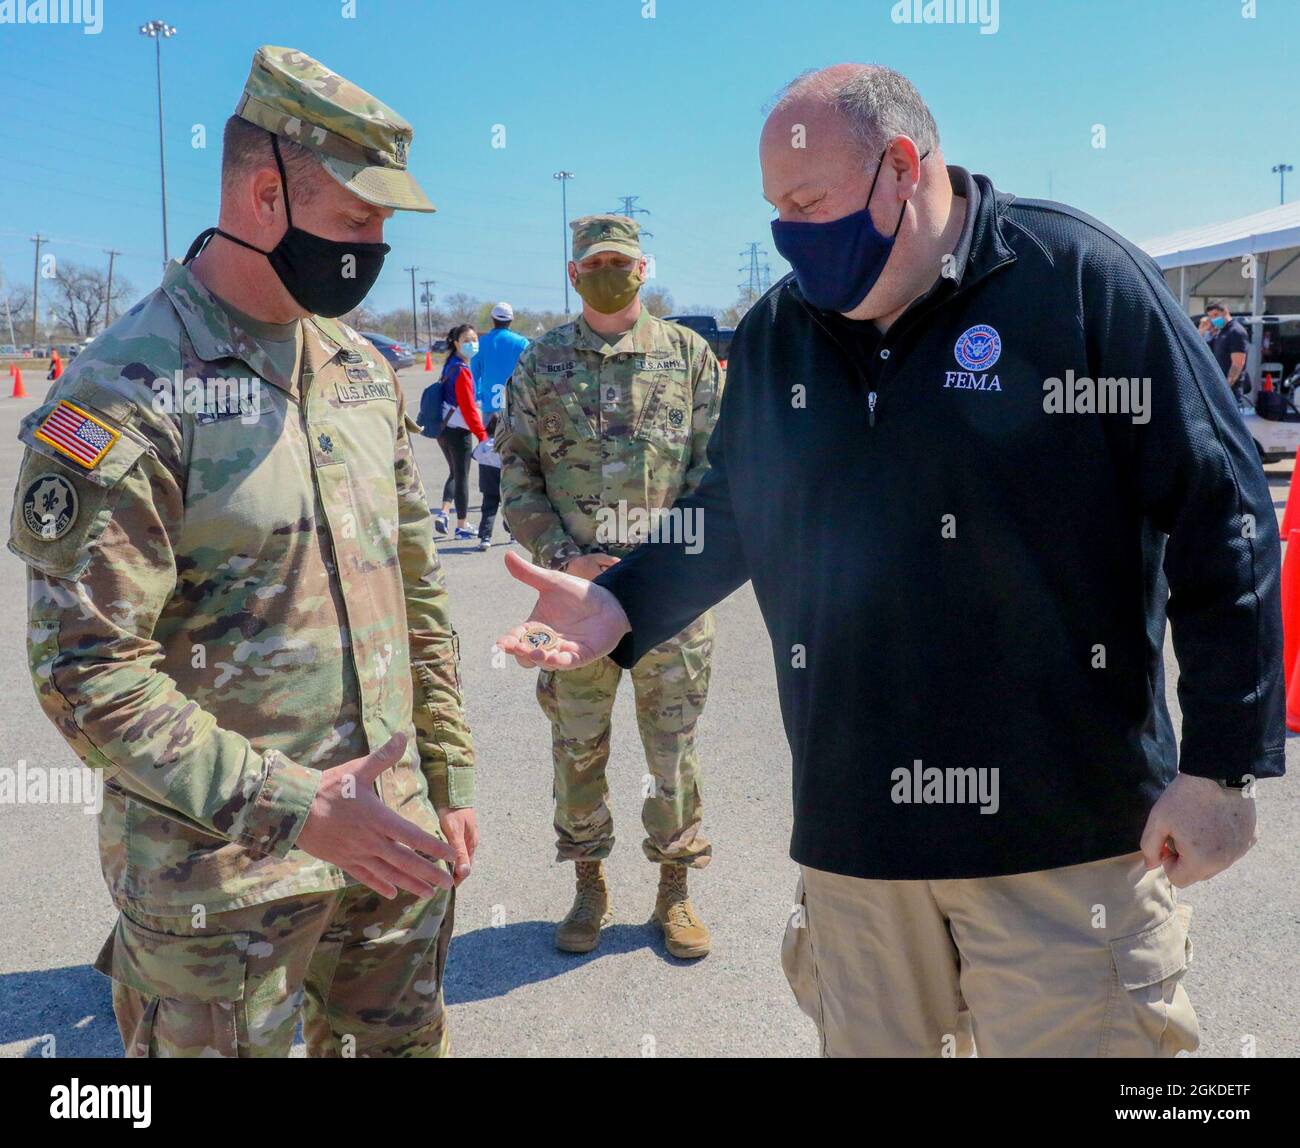 U.S. Army Lt. Col. Nicholas Talbot (left), commander of 1st Combined Arms Battalion, 63rd Armor Battalion, 2nd Armored Brigade Combat Team, 1st Infantry Division, receives a coin from Robert “Bob” Fulton (right), the Acting Administrator of the Federal Emergency Management Agency (FEMA) at the Fair Park Community Vaccination Center (CVC) in Dallas, March 20, 2021. 1st Infantry Division Soldiers deployed to Dallas in February 2021 to assist FEMA in its vaccination efforts and have helped the CVC reach a site record of administering over 9,000 vaccines to local community members in one day. U.S. Stock Photo